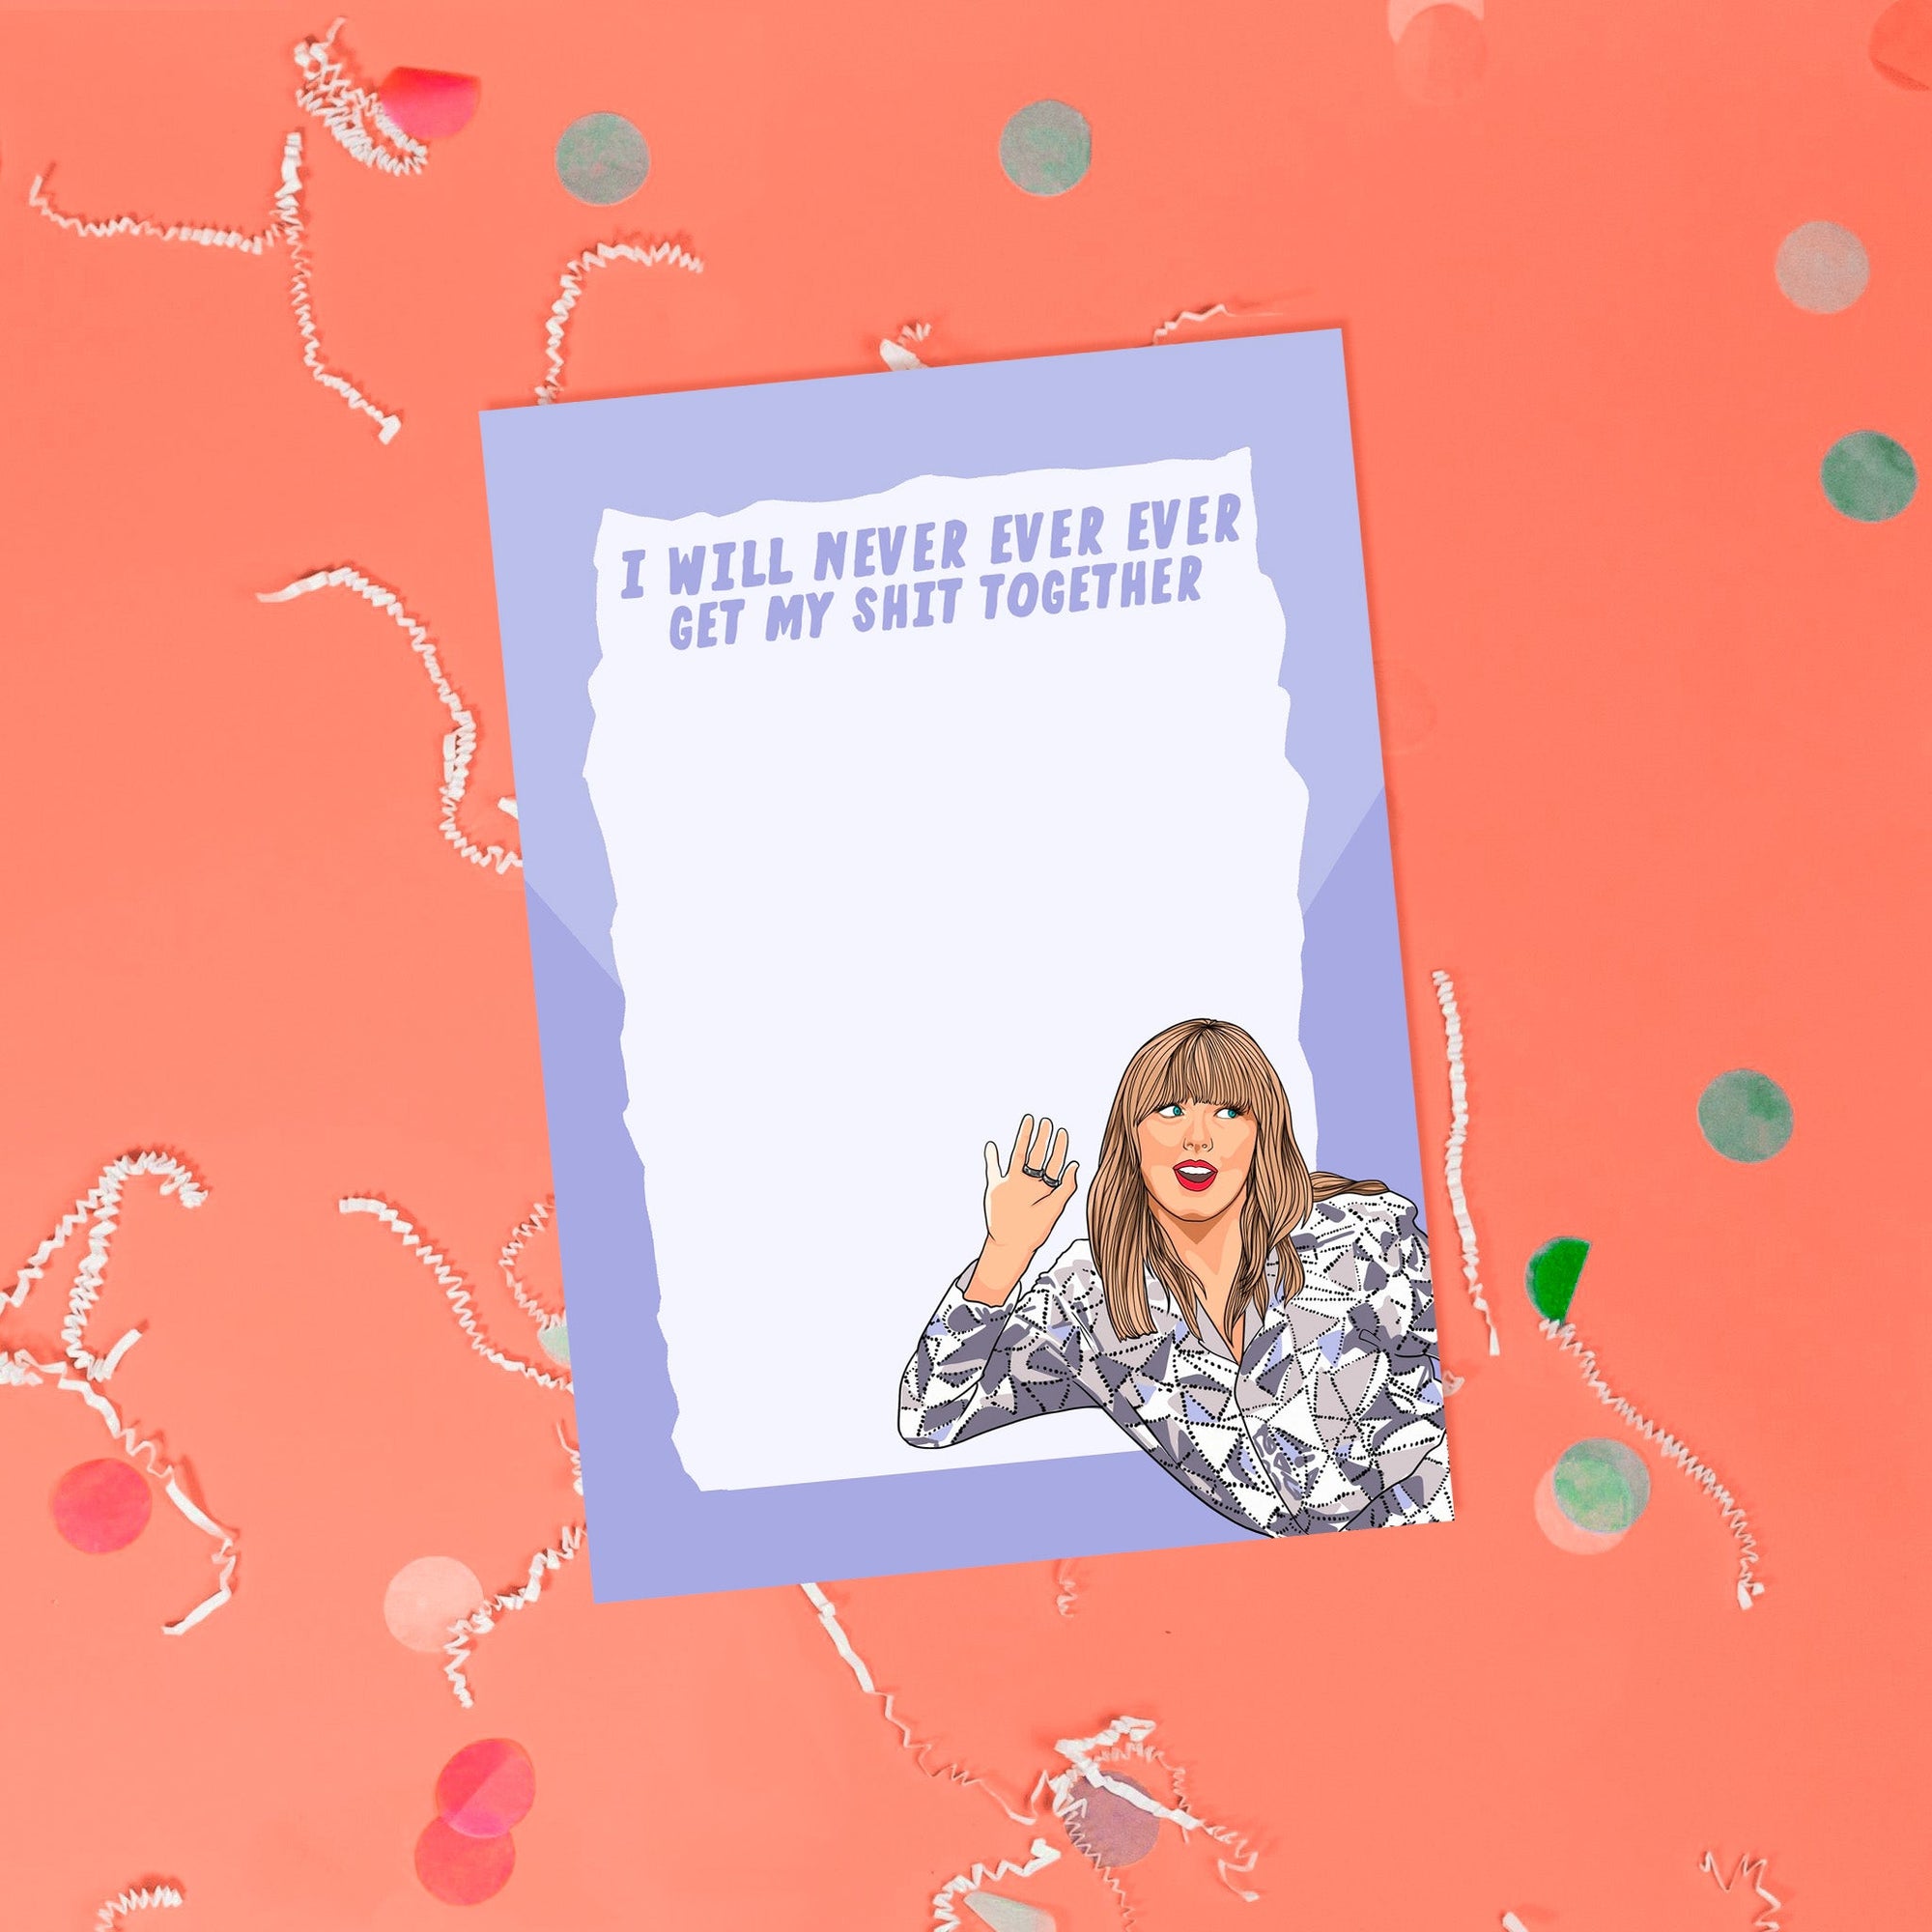 On a coral pink background sits a notepad with white crinkle and big, colorful confetti scattered around. This Taylor Swift inspired notepad is in lavender with a white background and it says at the top "I WILL NEVER EVER EVER GET MY SHIT TOGETHER" in lavender lettering and there is an illustration of Taylor Swift at the bottom.